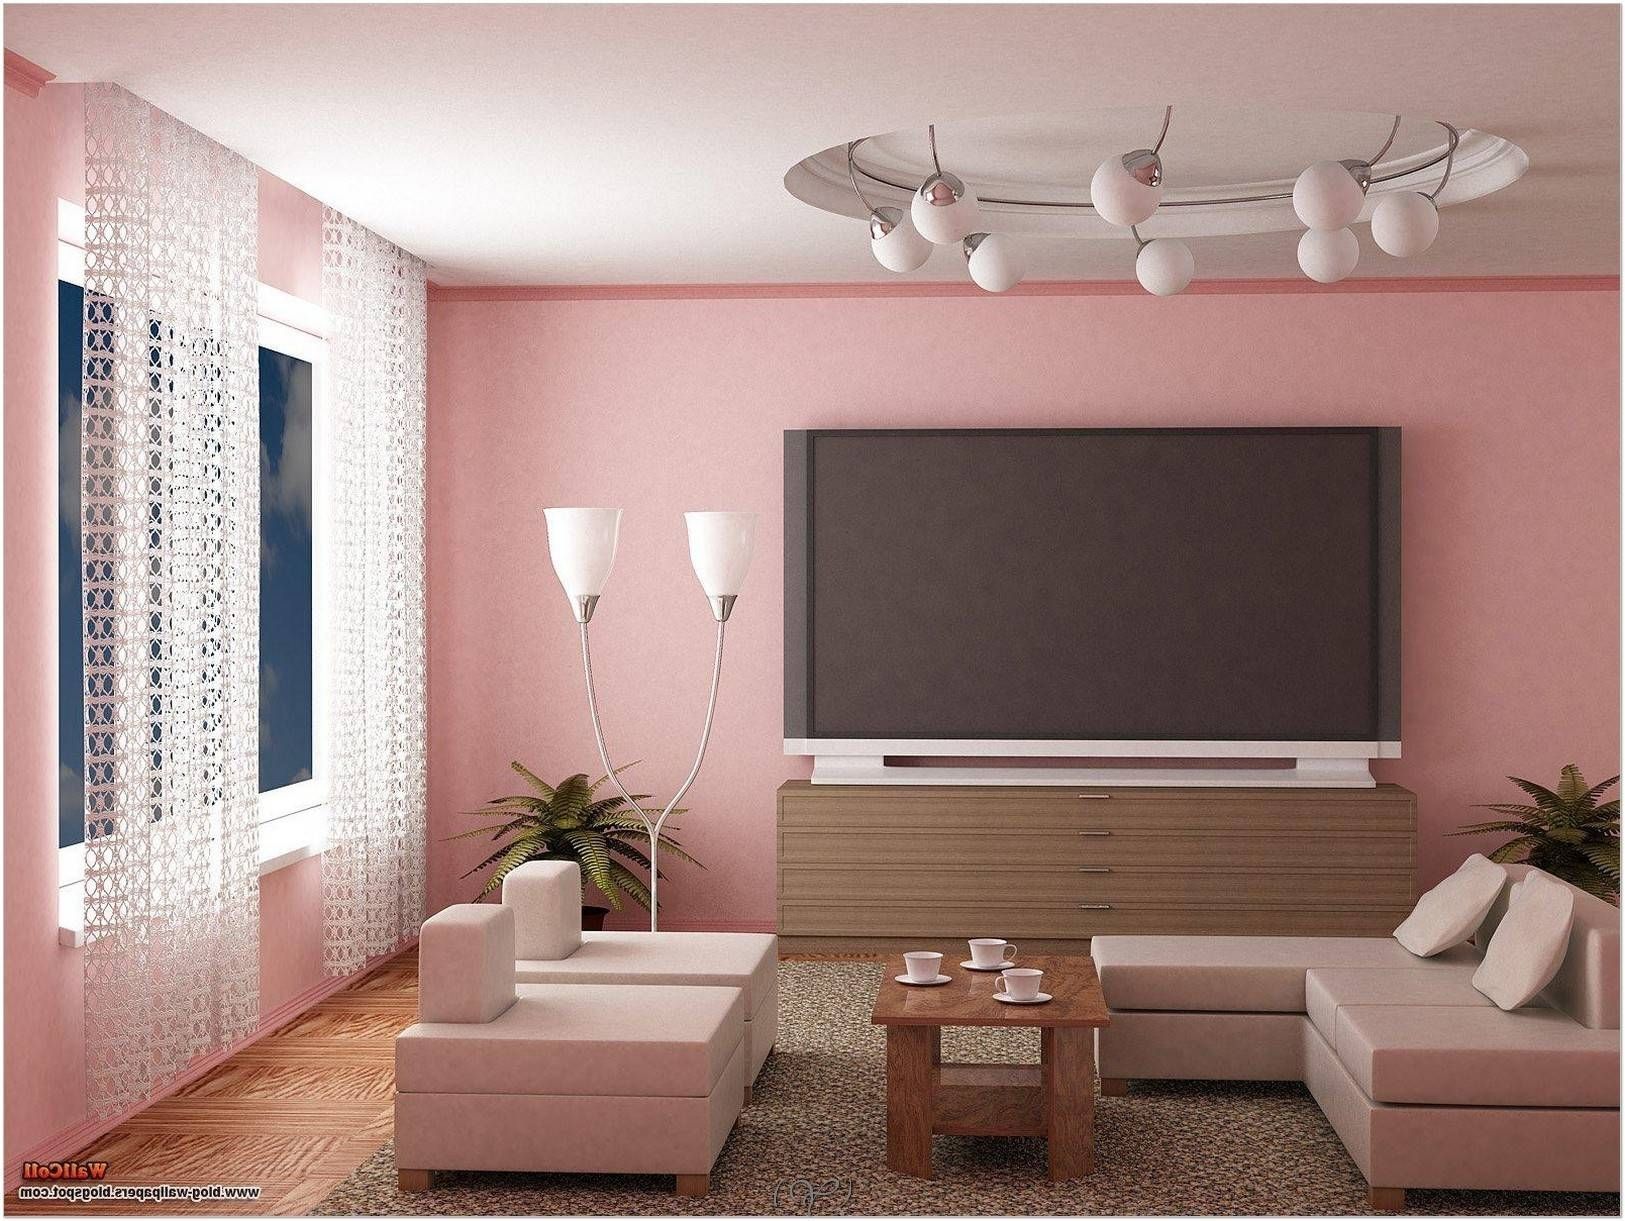 Bedroom : How To Decorate A Wall Easy Canvas Painting Ideas 3d In Most Popular 3d Wall Art And Interiors (View 20 of 20)